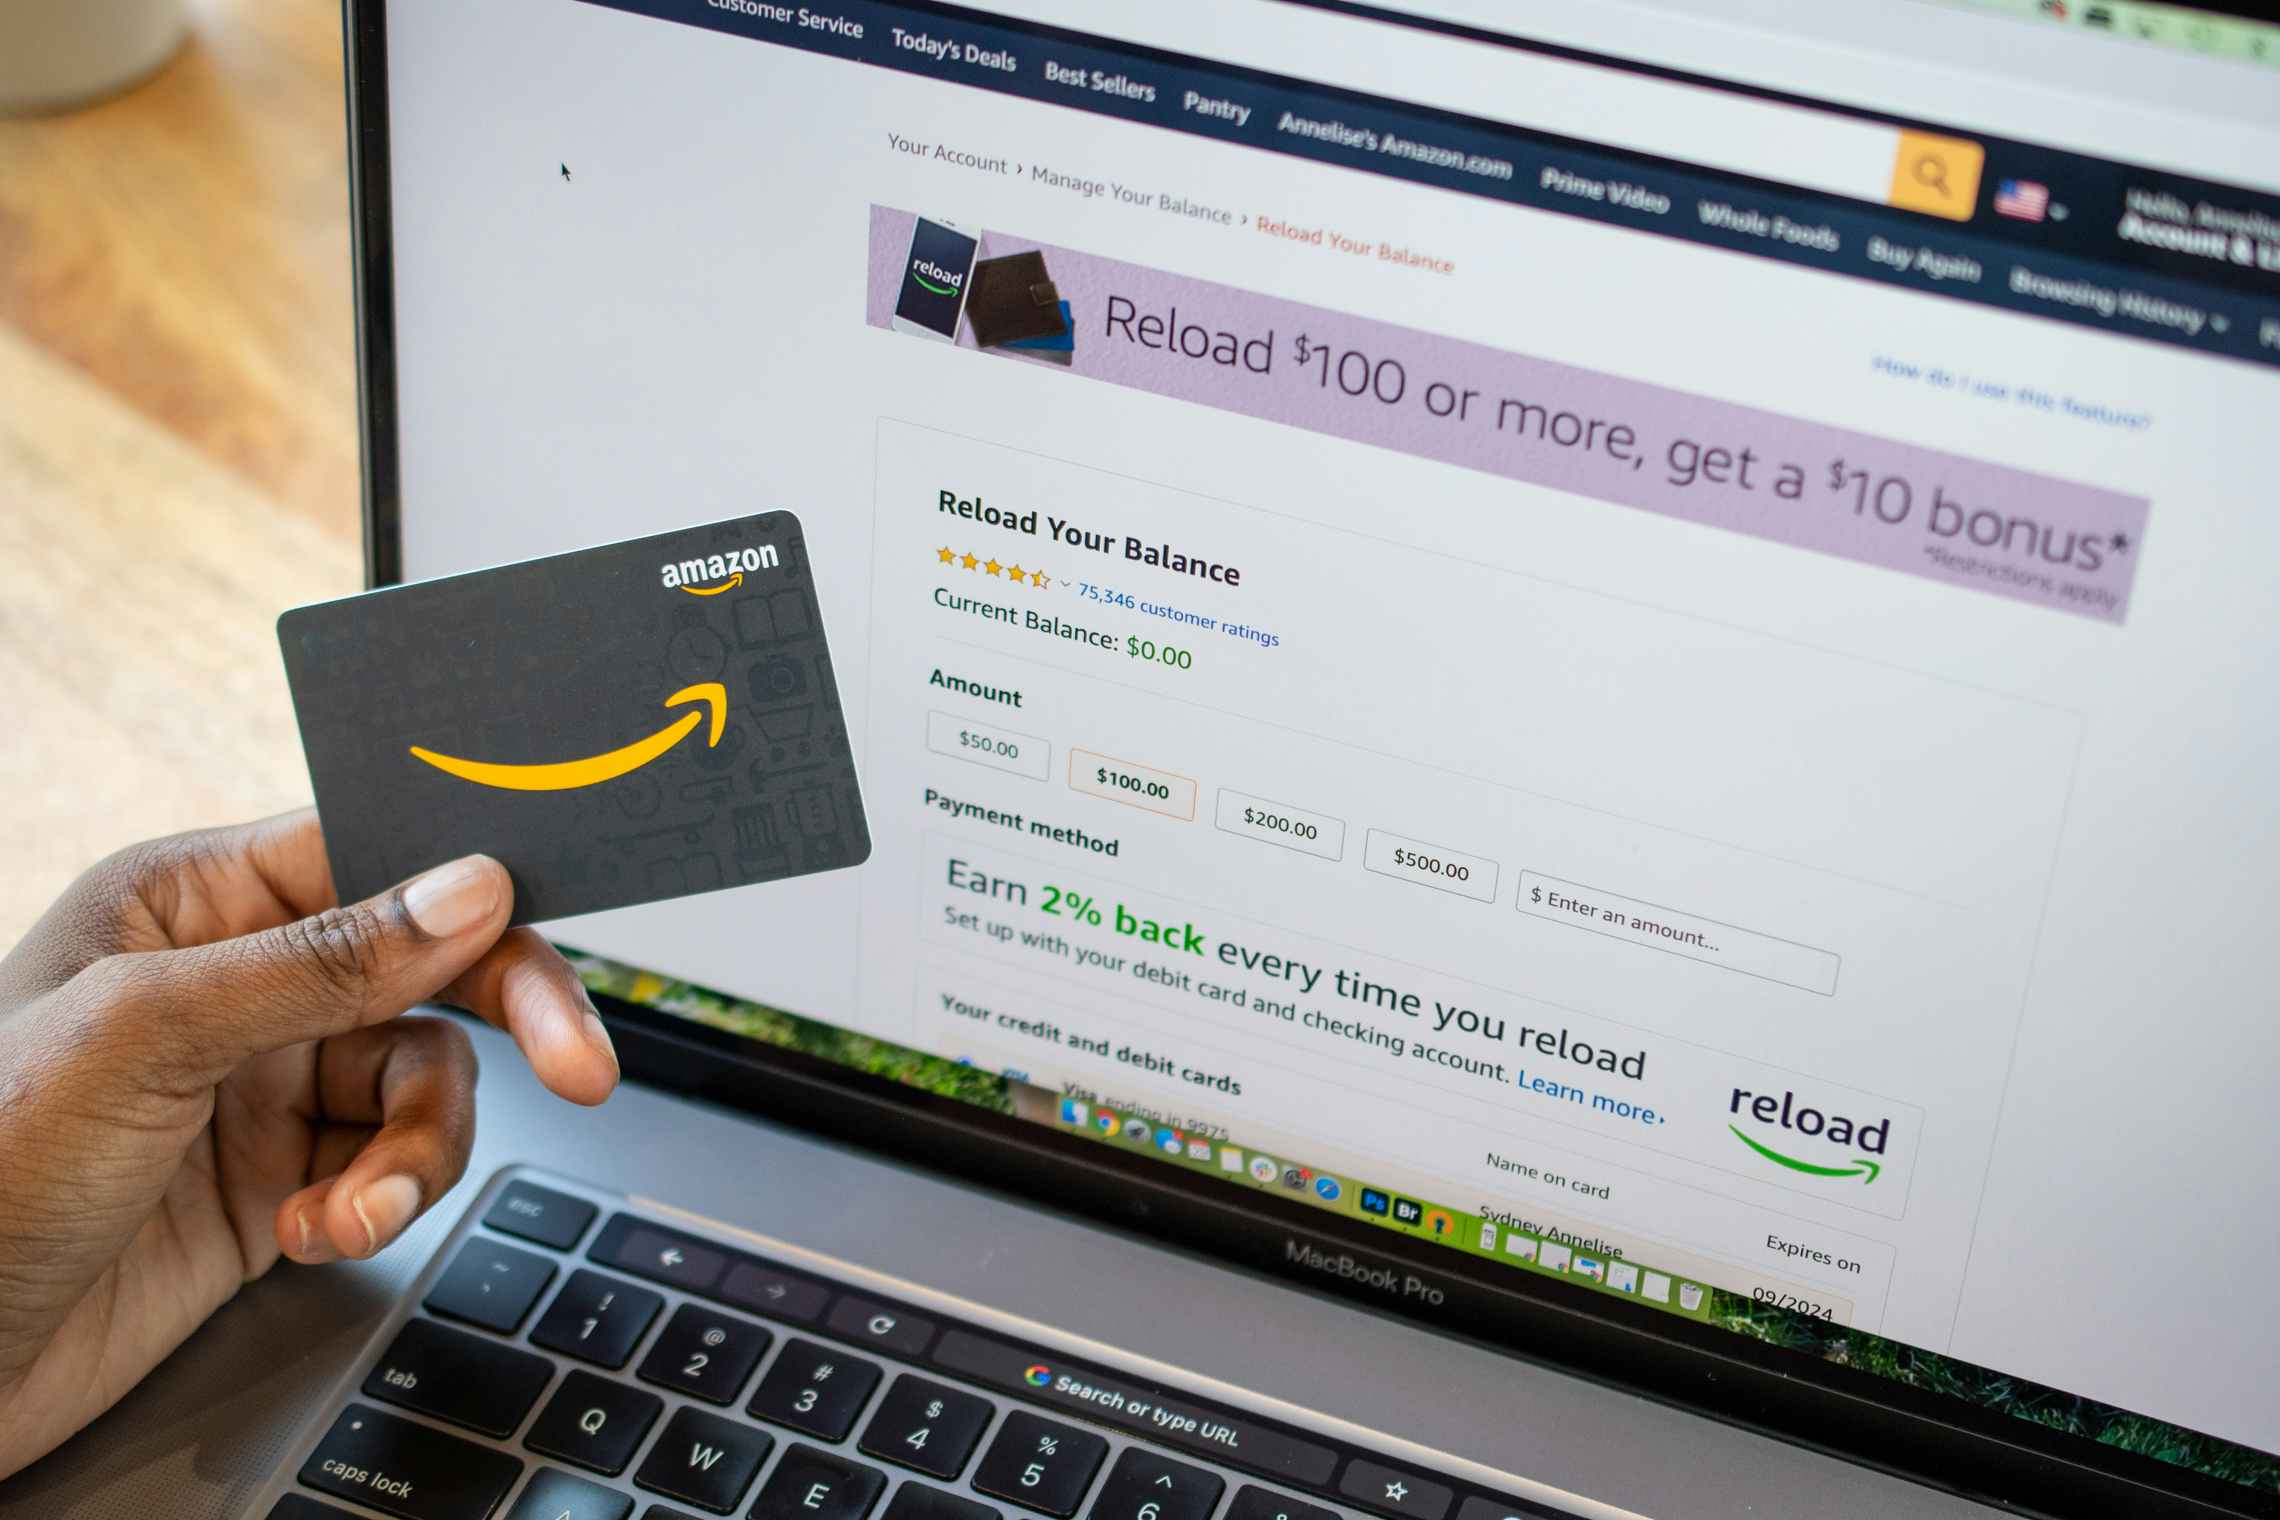 A person's hand holding an Amazon gift card in front of a laptop screen displaying the Amazon gift card reload webpage.